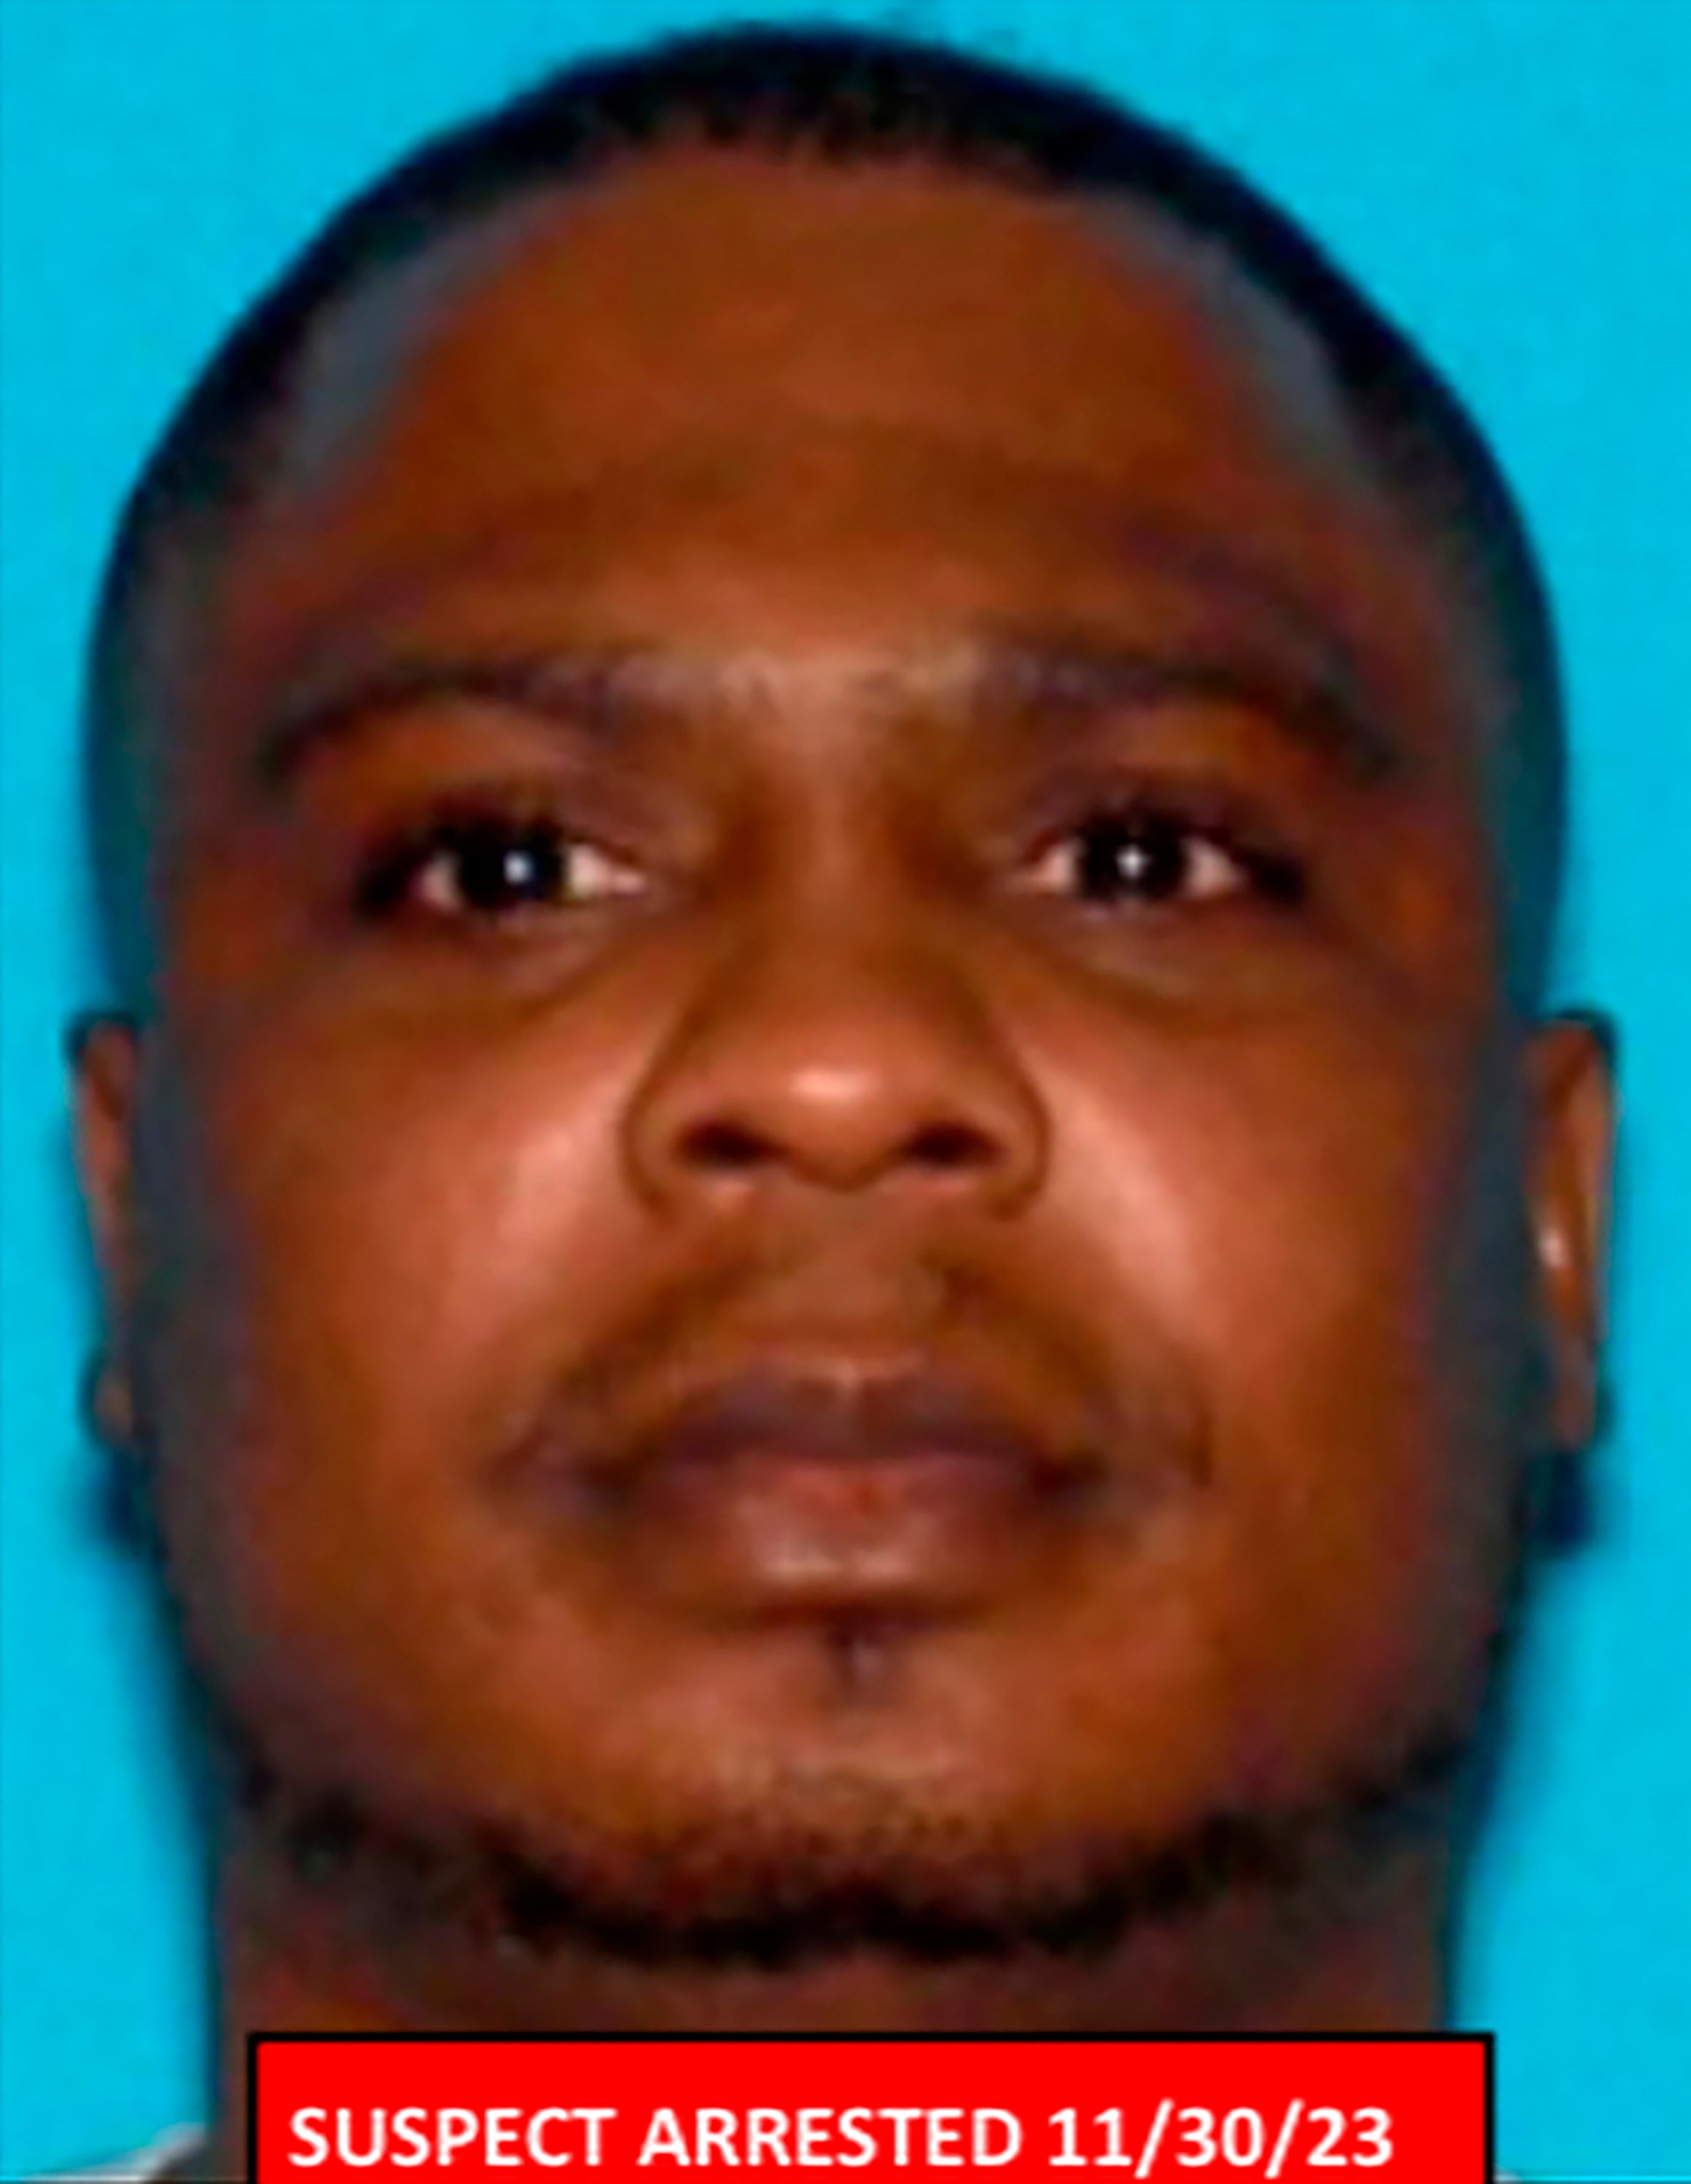 This photo released by the Los Angeles County Sheriff’s Department shows suspect Jerrid Joseph Powell